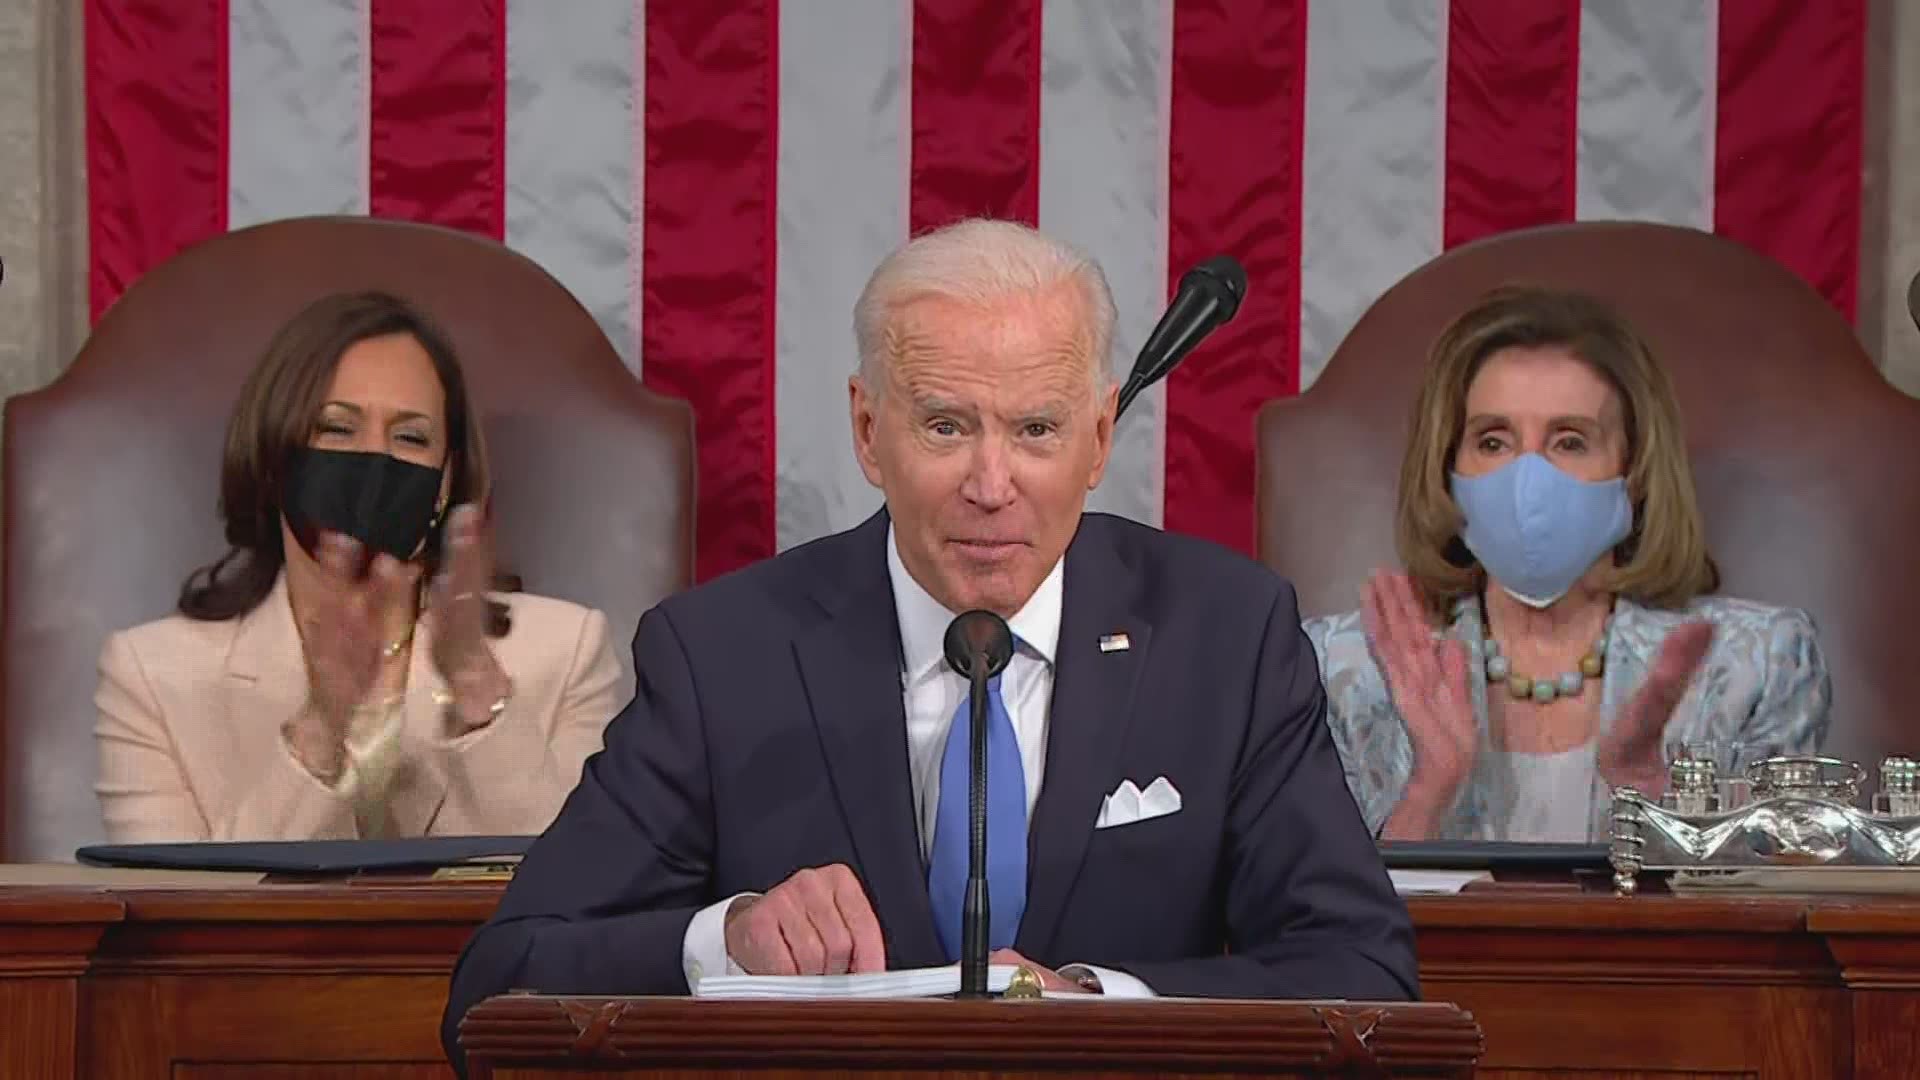 In his address to Congress, Biden urged Americans to get the COVID-19 vaccine.